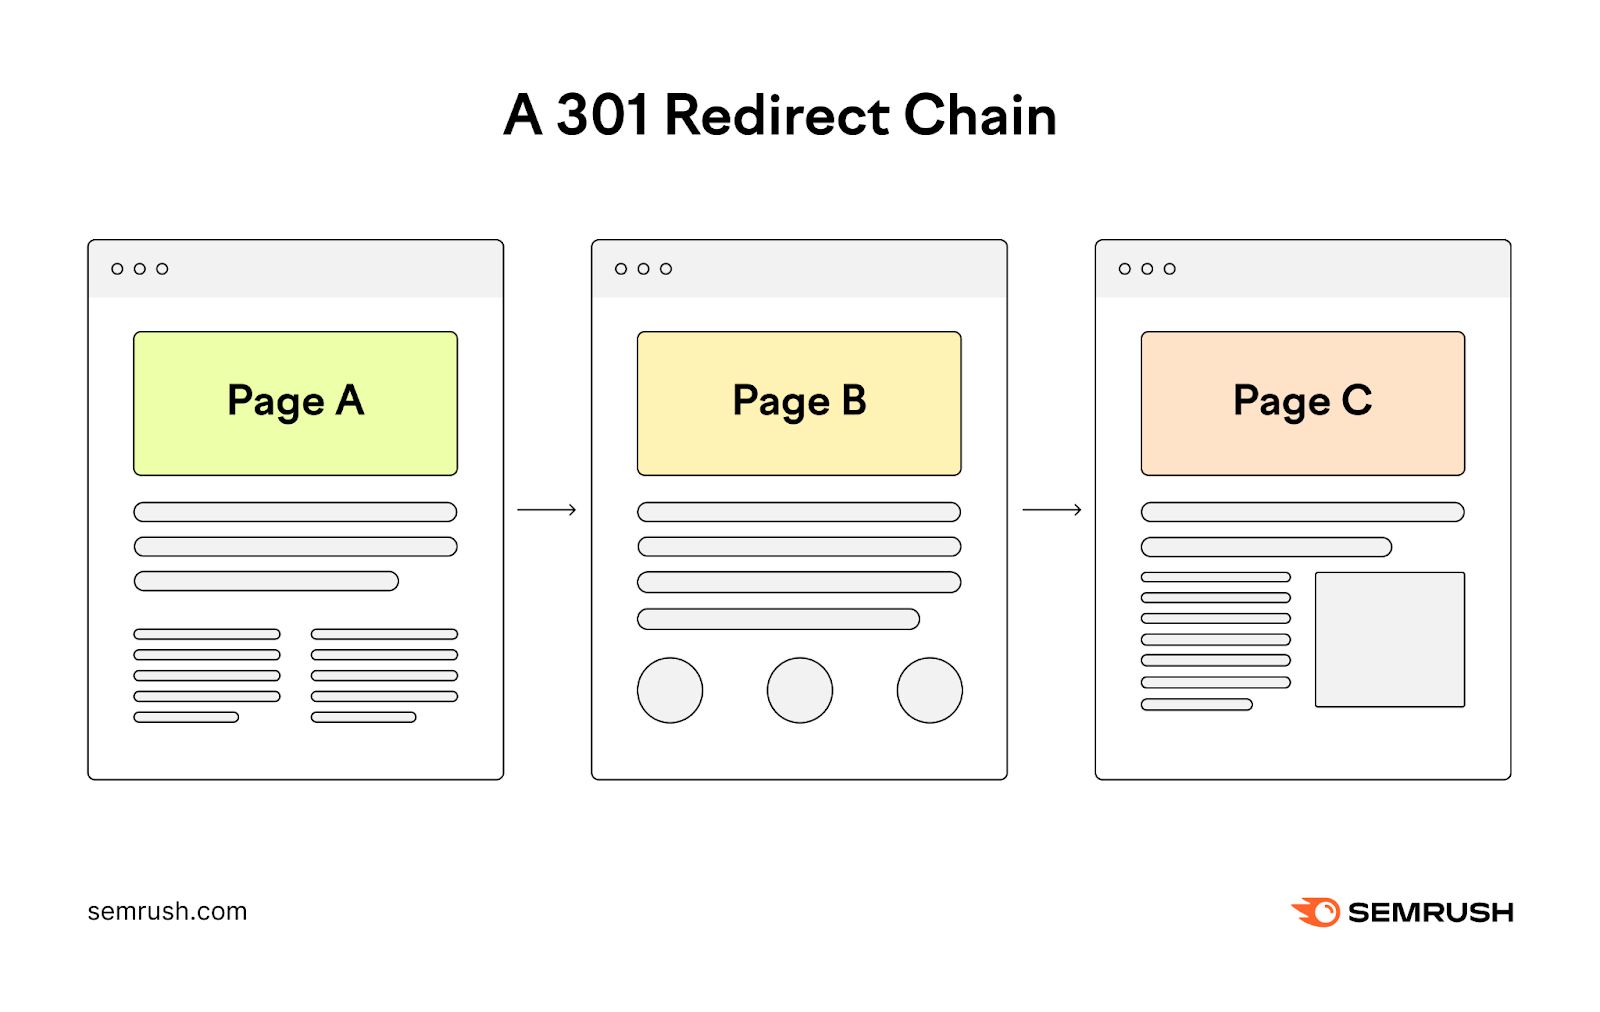 A visual showing a 301 redirect chain